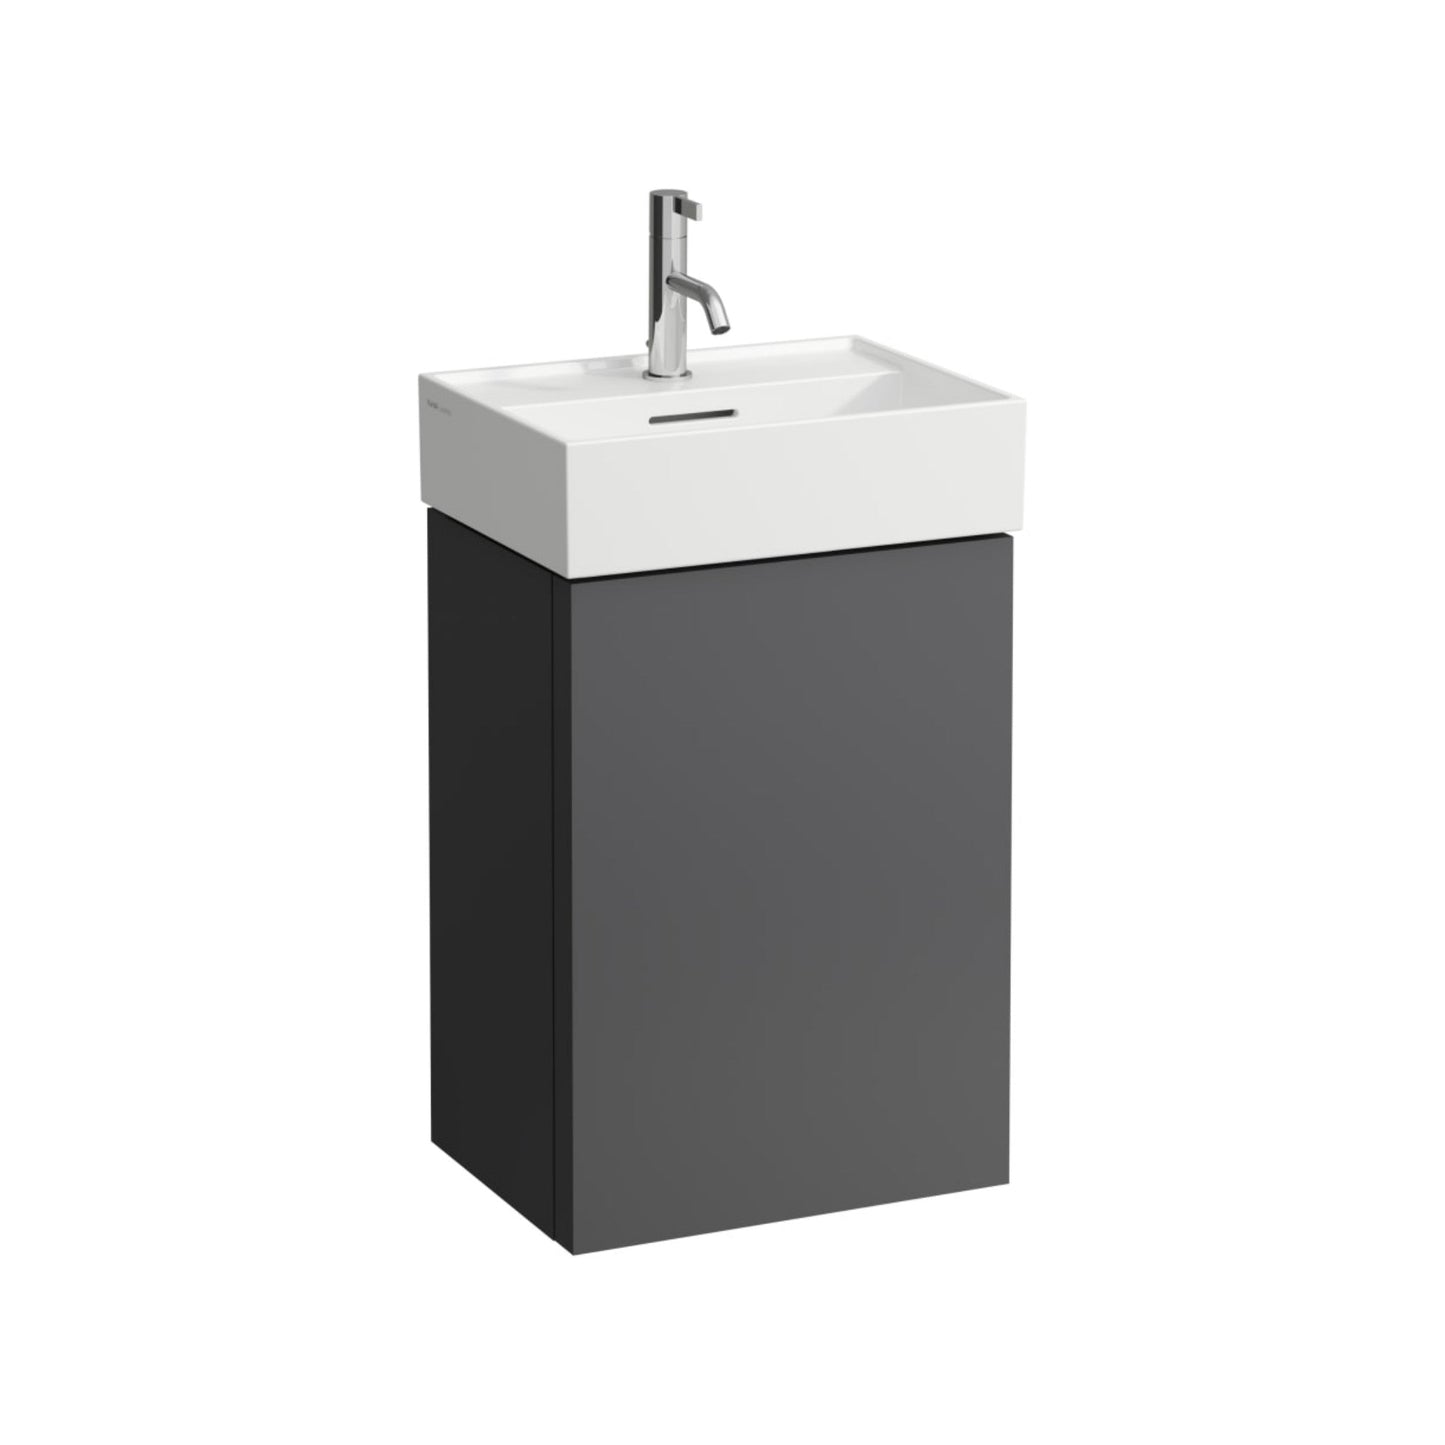 Laufen Kartell 18" x 13" Matte Gray Wall-Mounted Bathroom Sink Without Faucet Hole